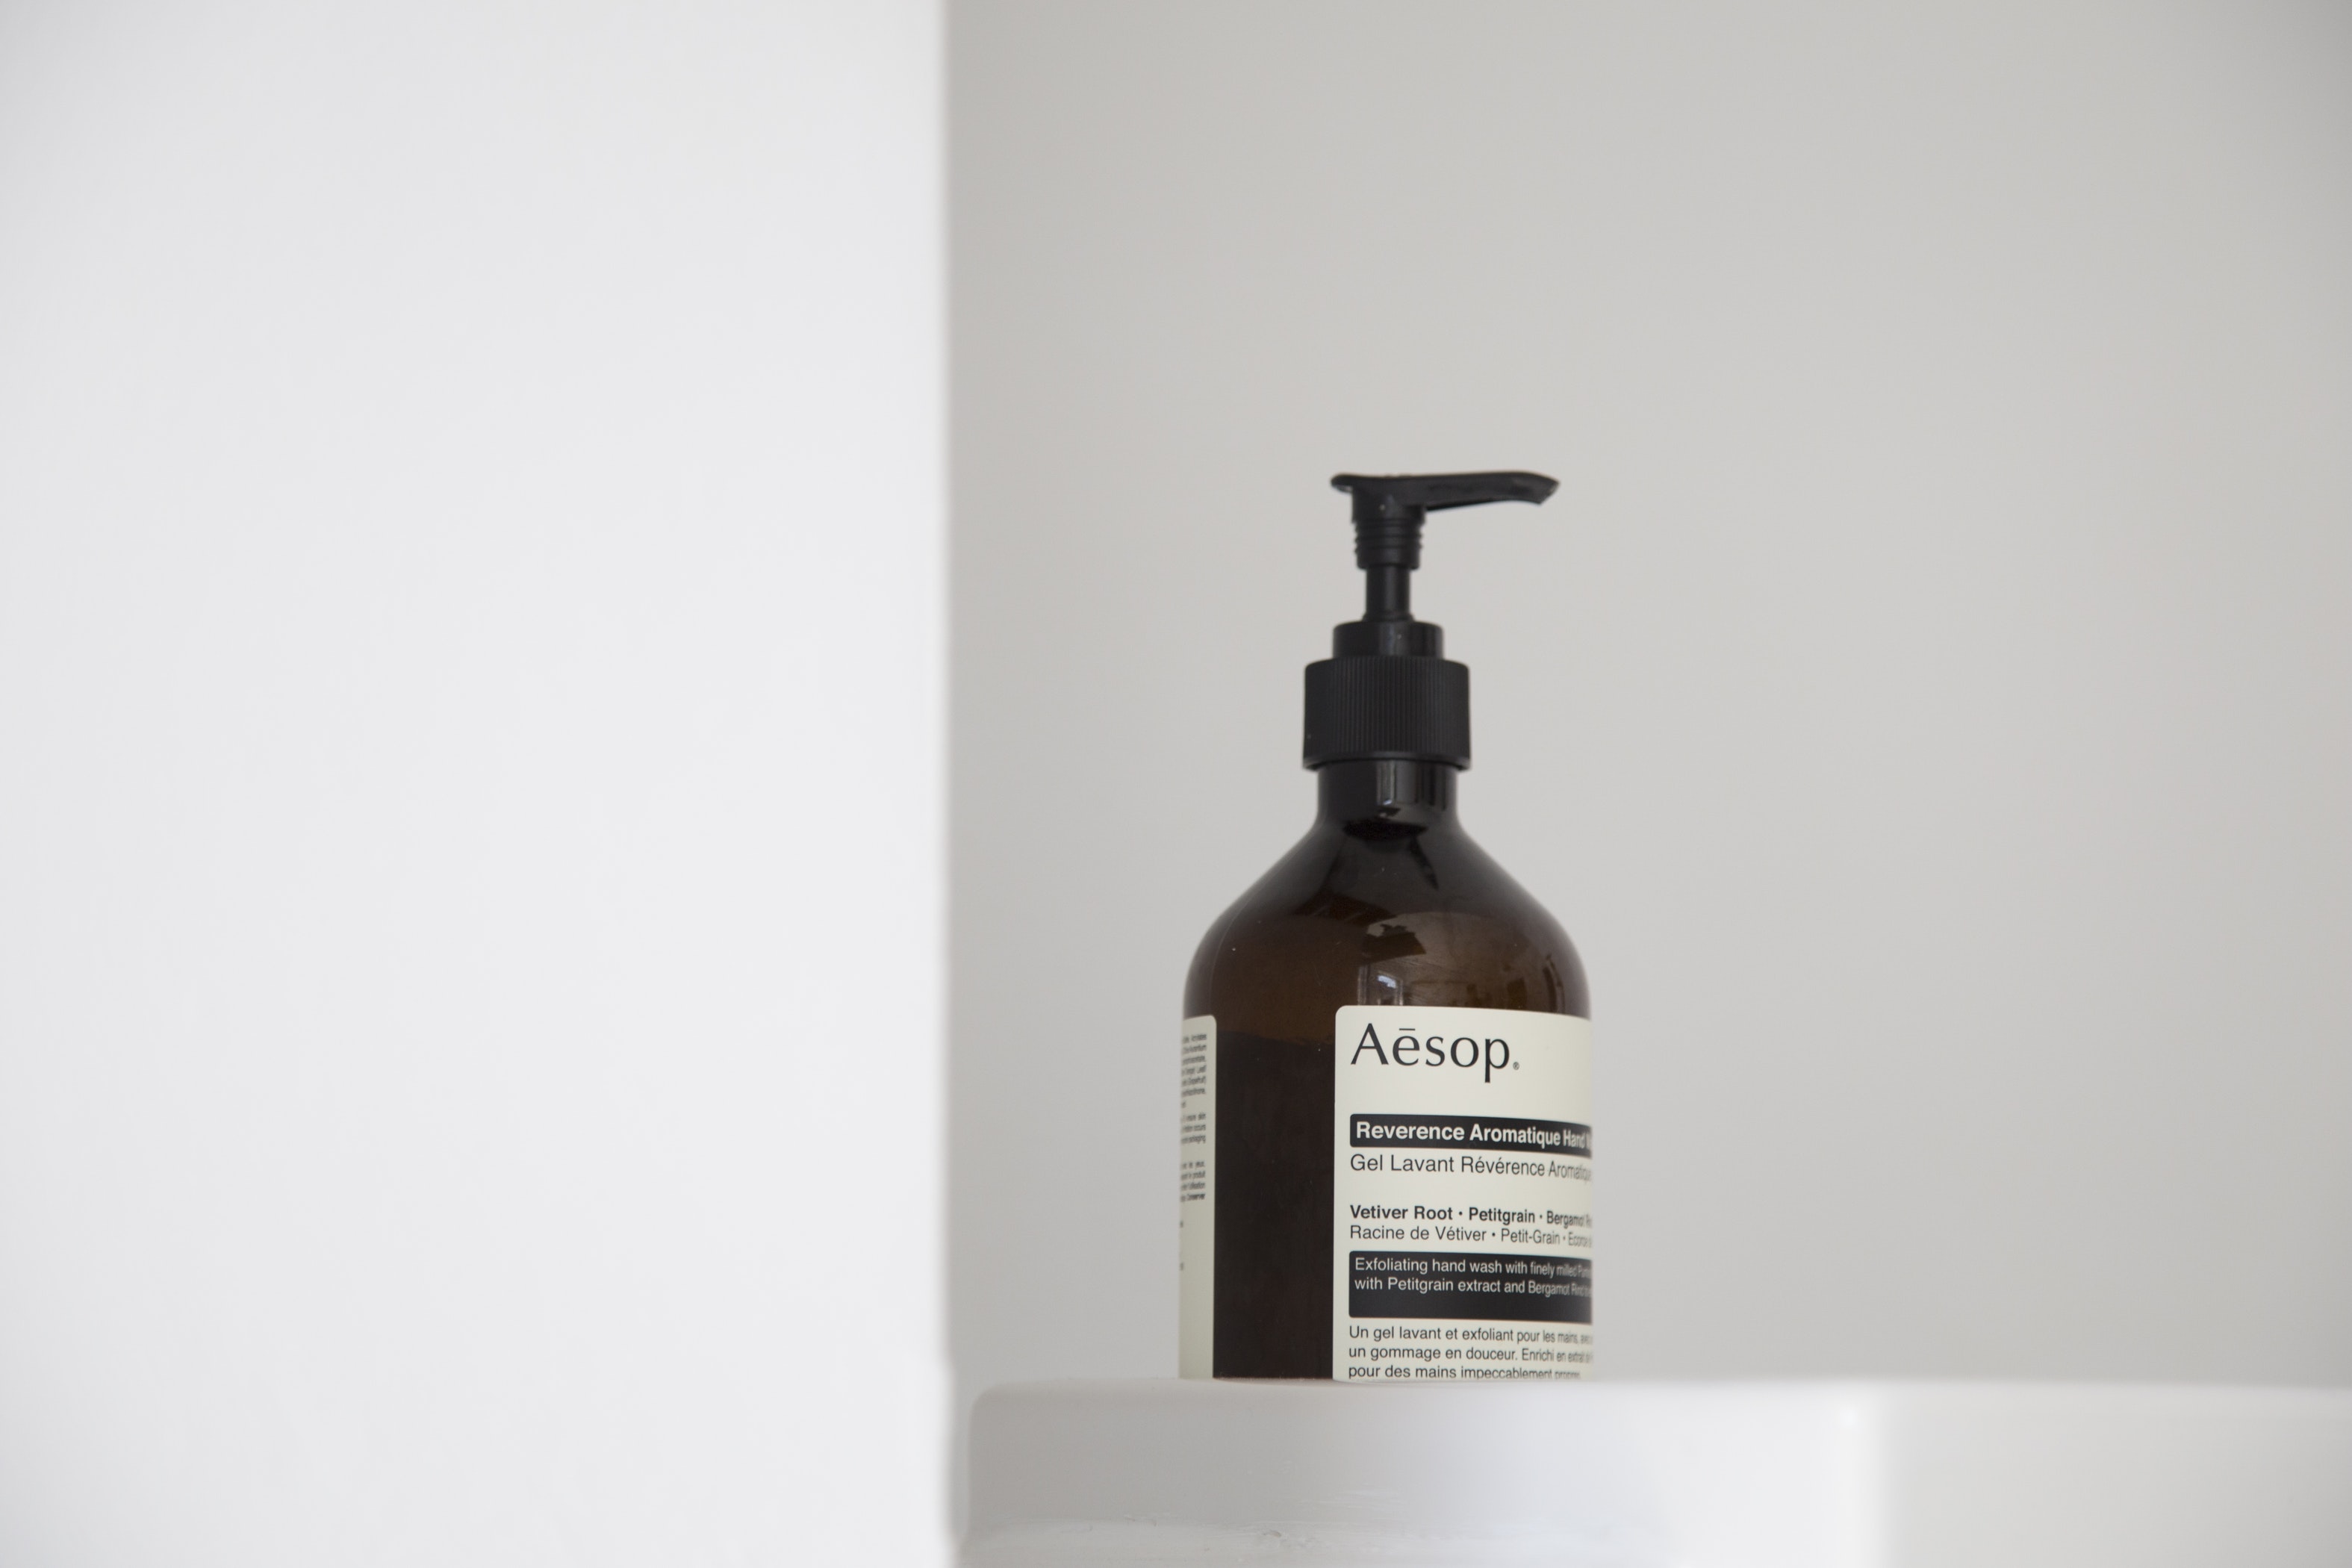 We round up the Best Hand Soap for Washing your hands and keeping them clean.